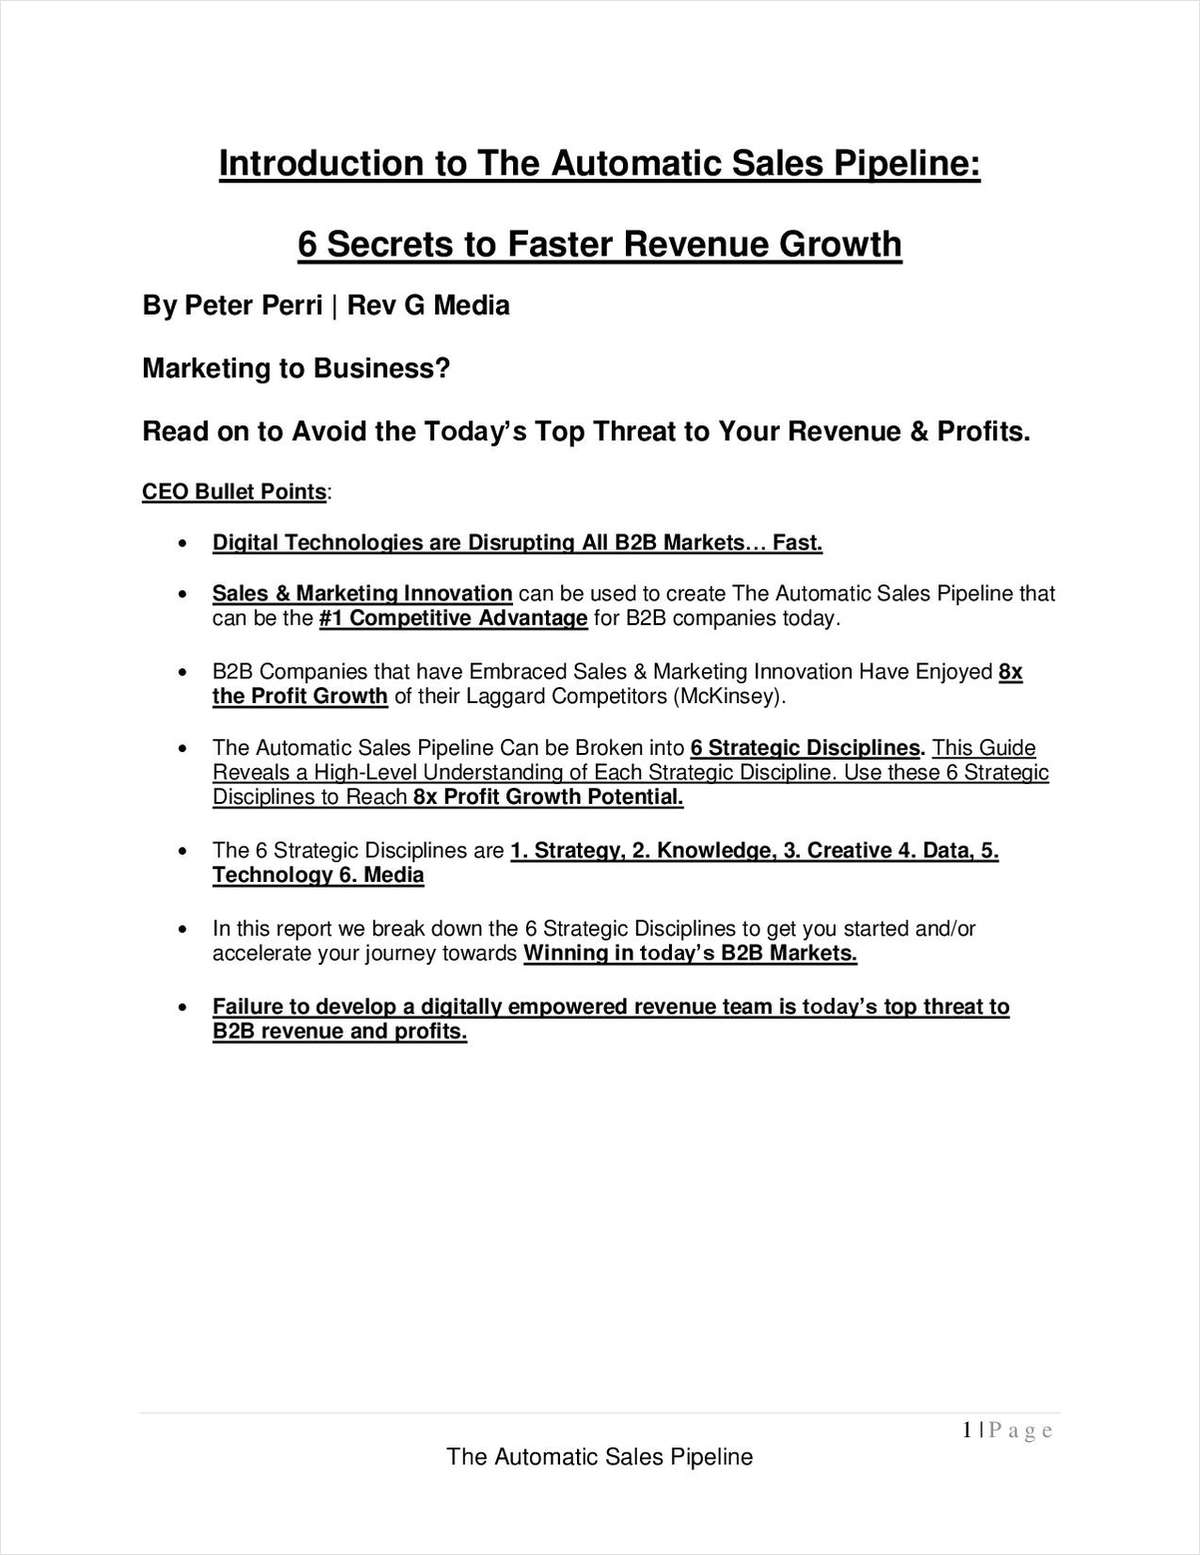 6 Secrets to Faster Revenue Growth for Leaders